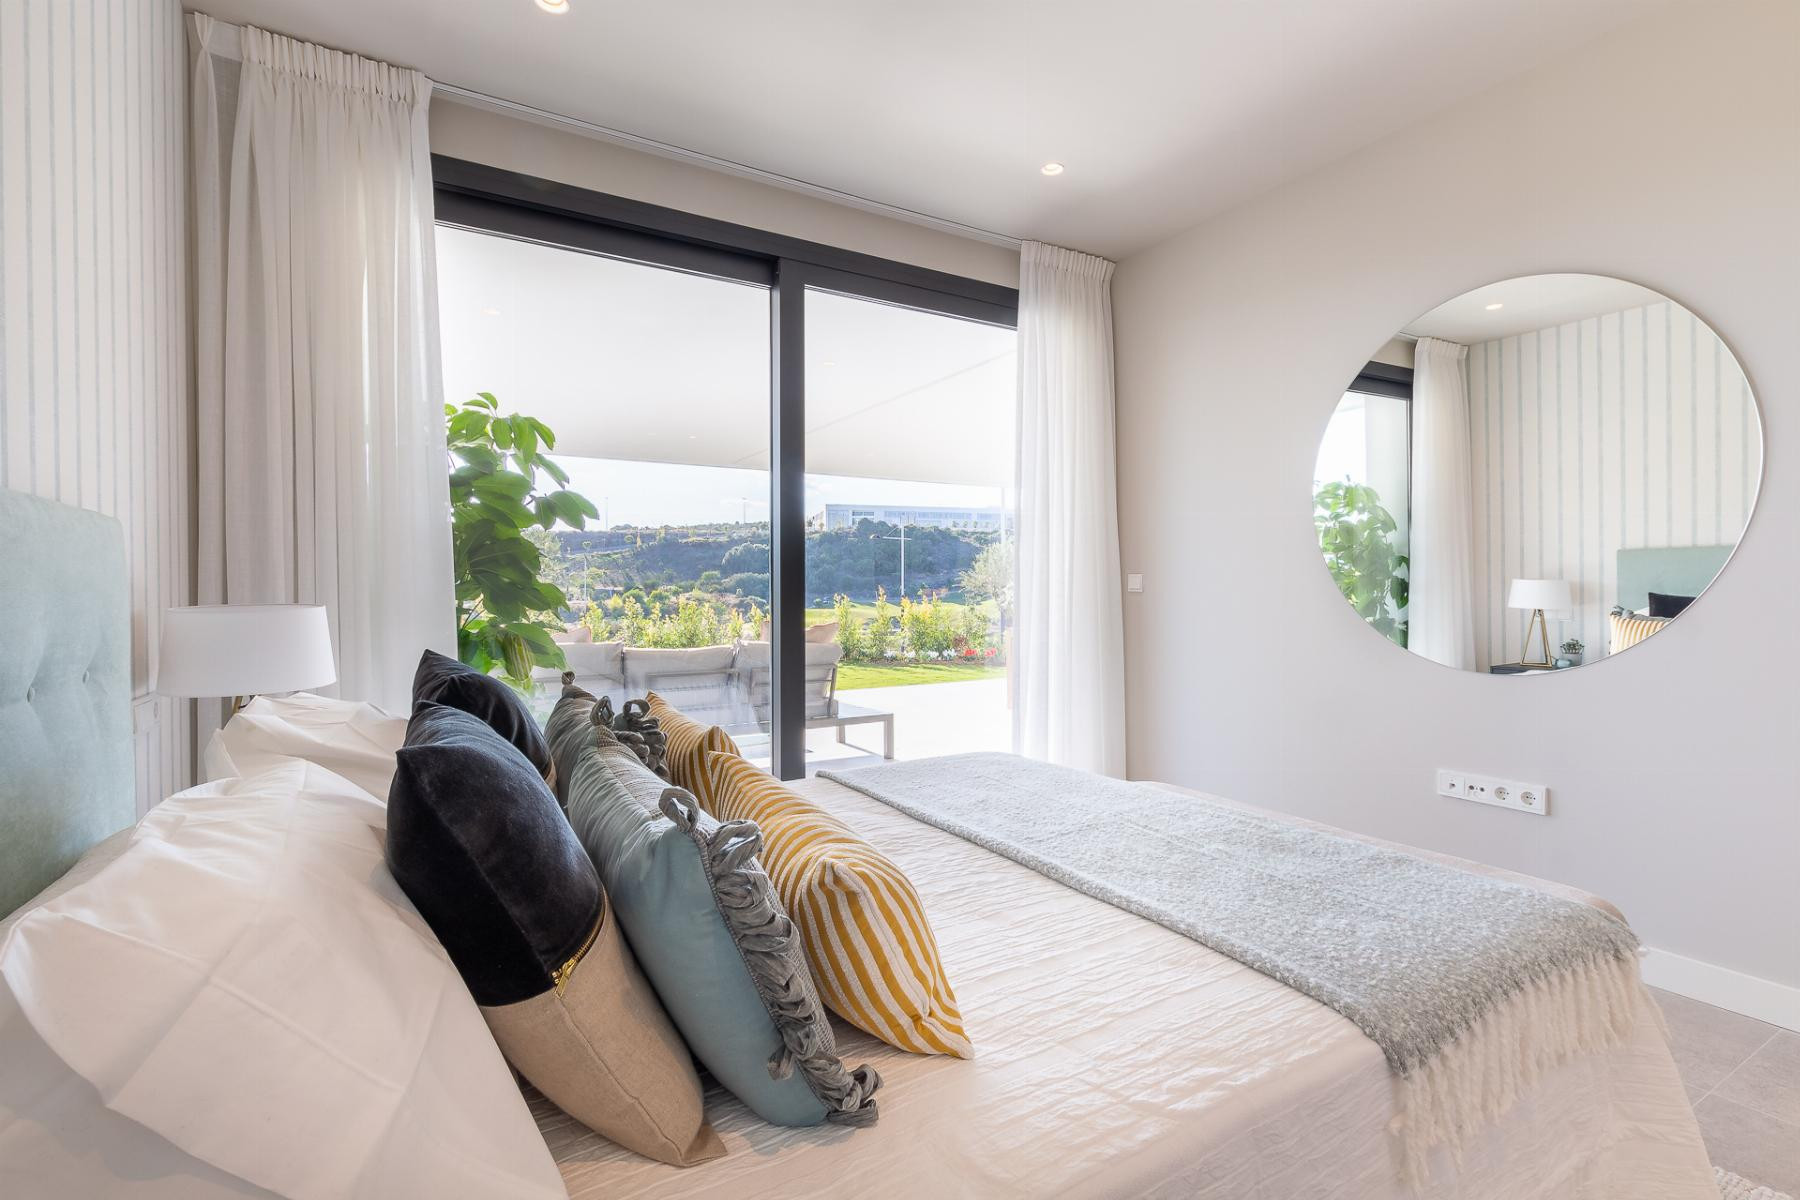 Azahar de Estepona: Apartments and penthouses from 2 to 4 bedrooms with sea and golf course views. | Image 21